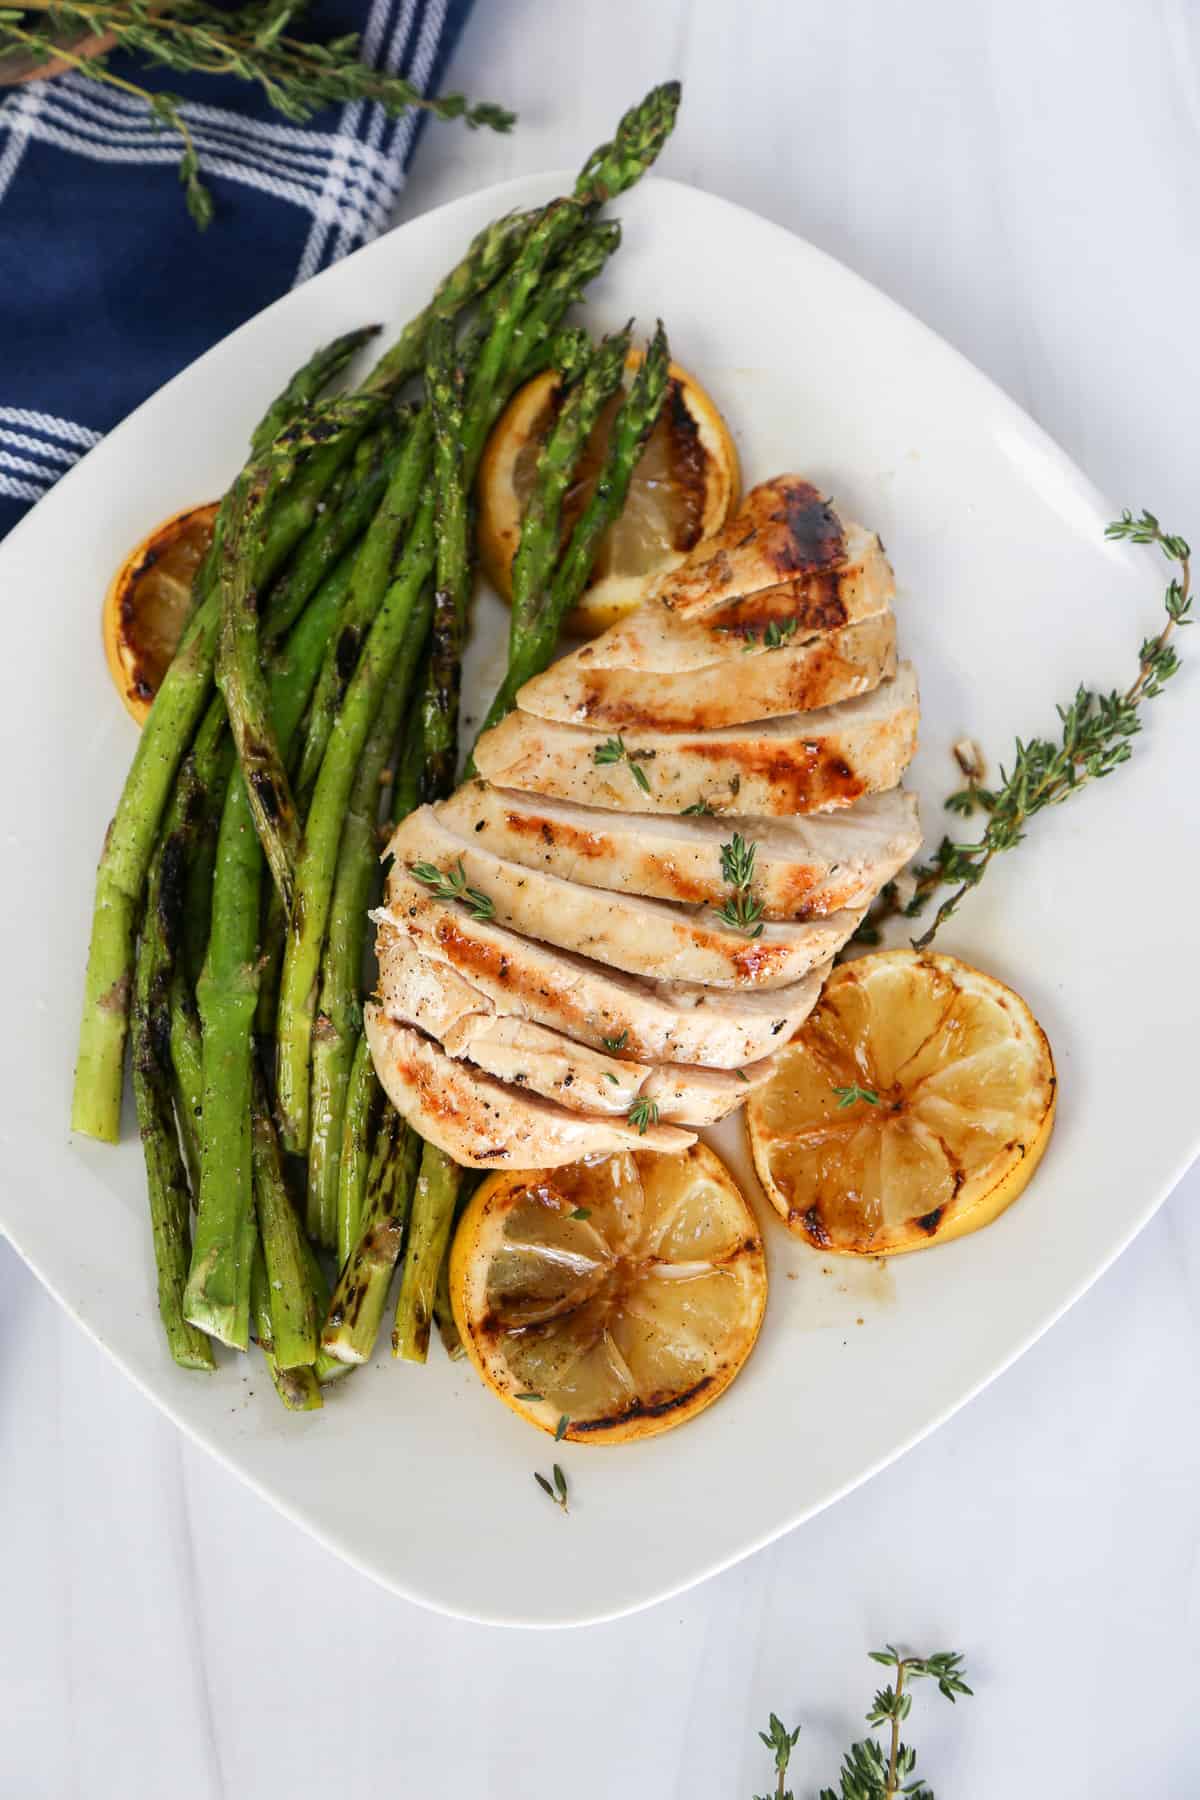 Grilled Lemon garlic chicken sliced and laying on top of grilled asparagus and lemon slices.